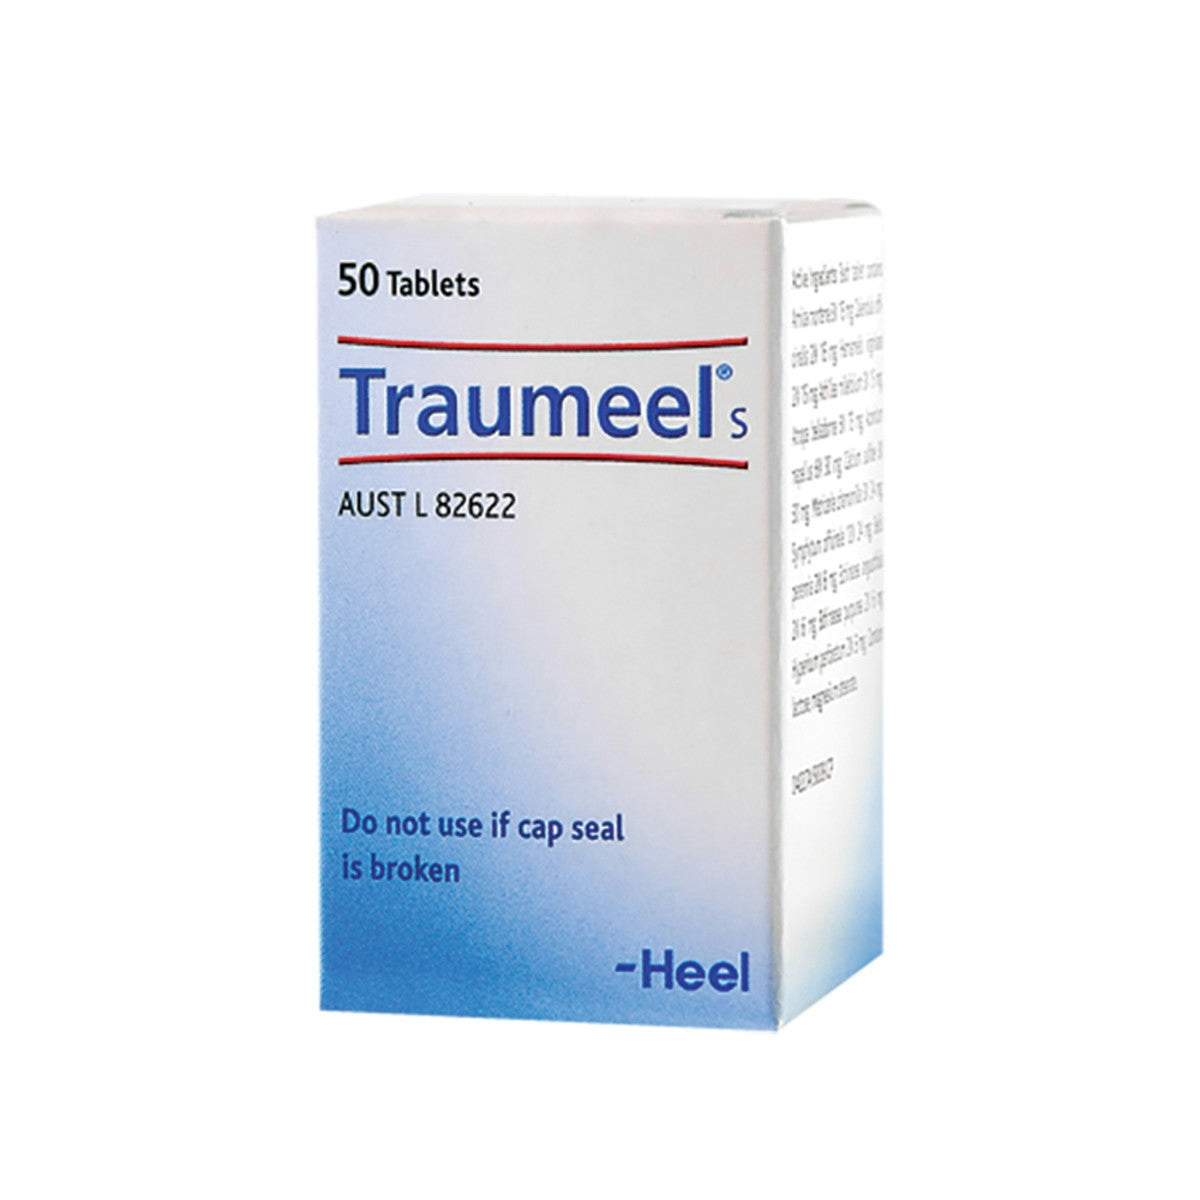 image of Heel Traumeel S 50t on white background 